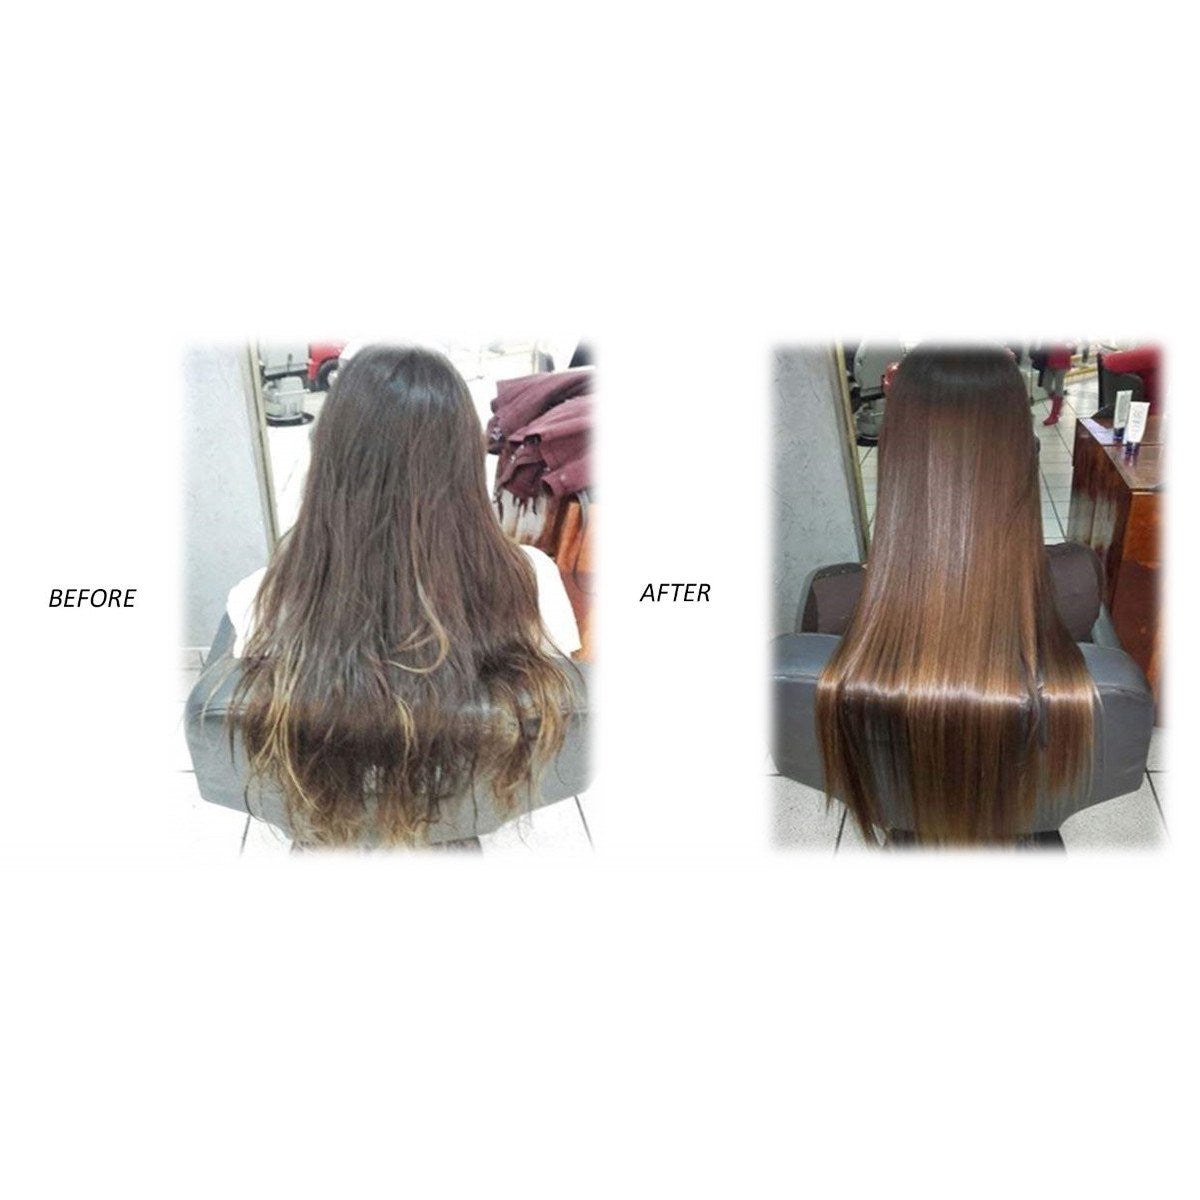 Before and after picture of a woman's hair using PowerPlex to improve smoothness, shine, and color